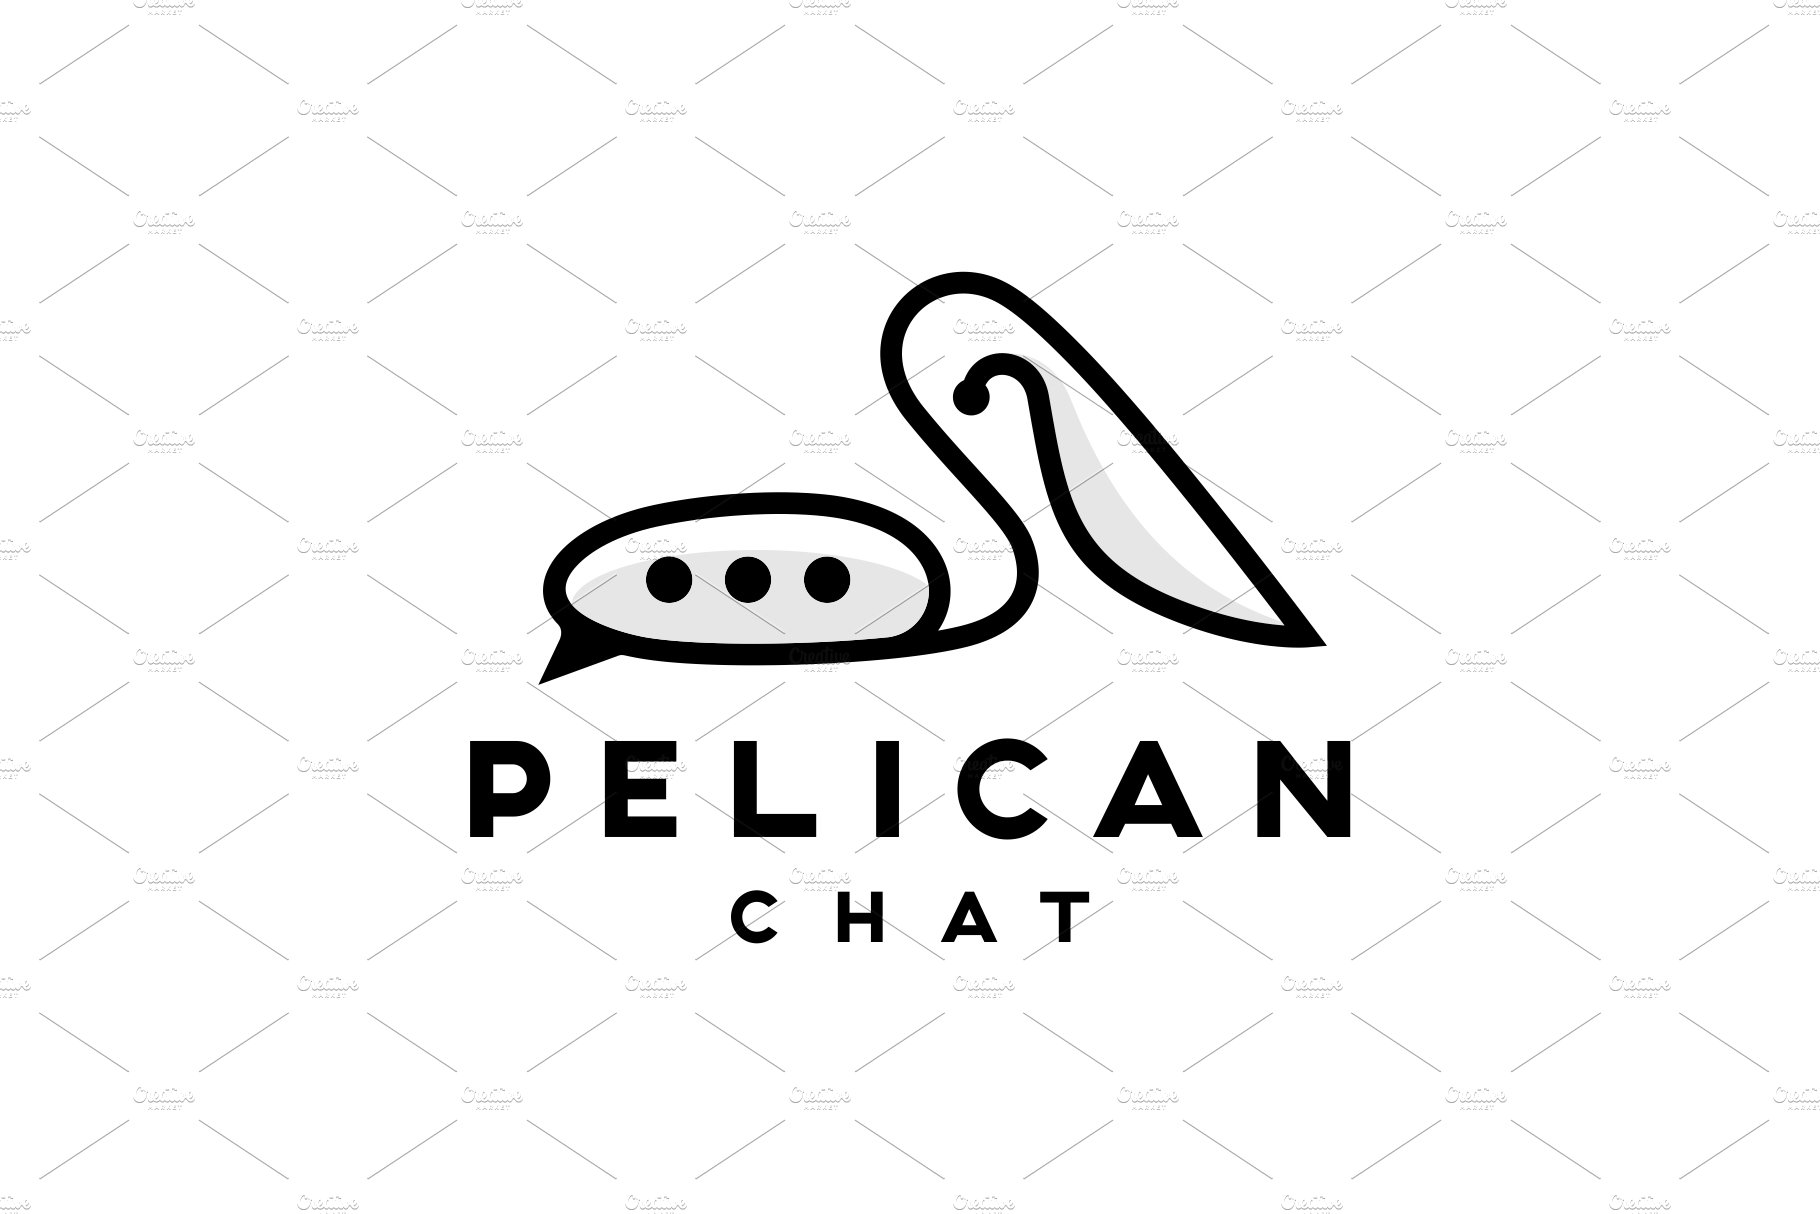 Pelican Chat Logo cover image.